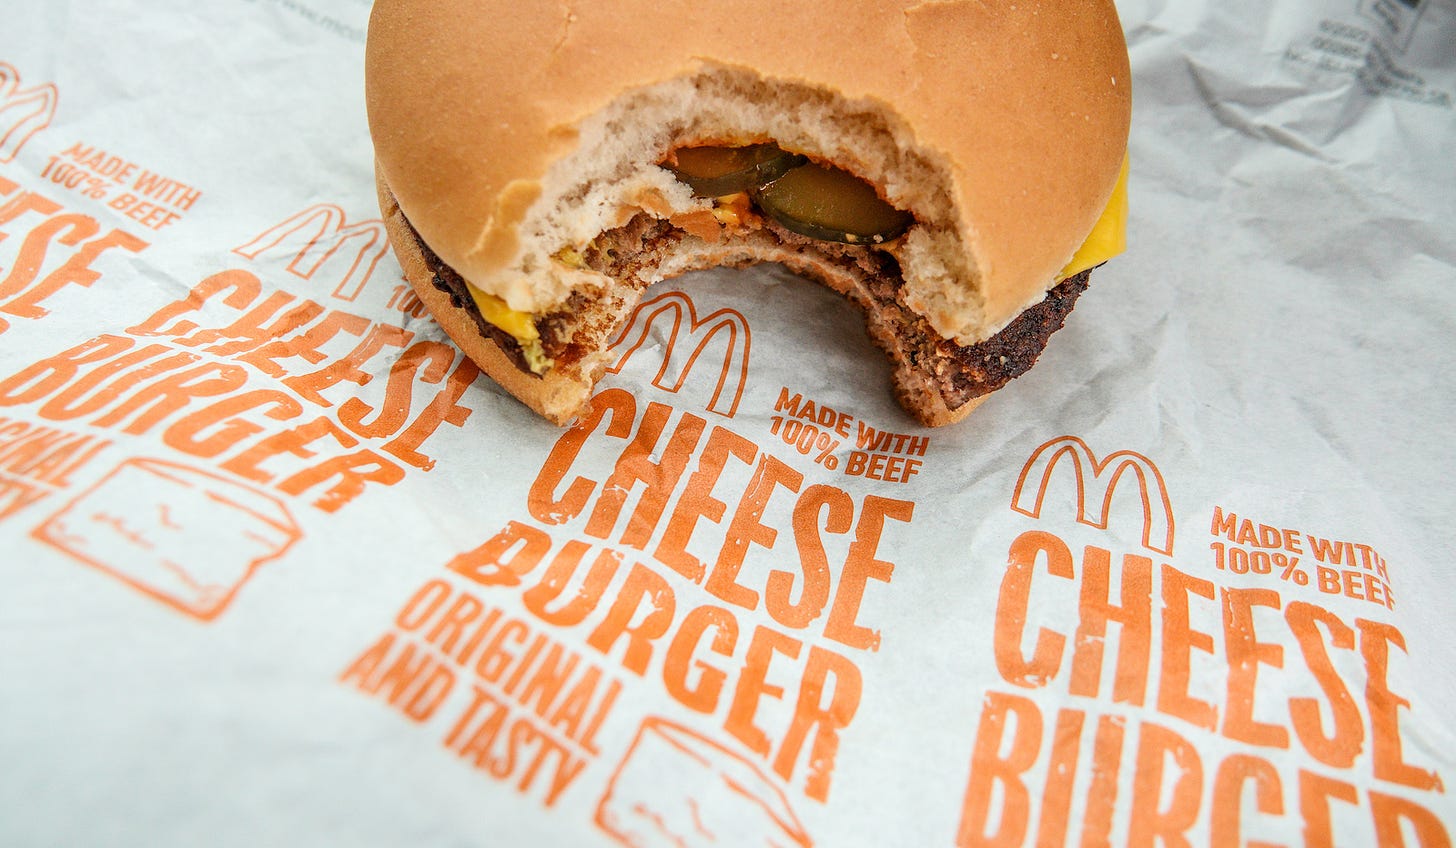 A close-up of a McDonald's cheeseburger, which has a bite taken out of it. The burger rests on the McDonalds wrapping, which says "made with 100% beef"